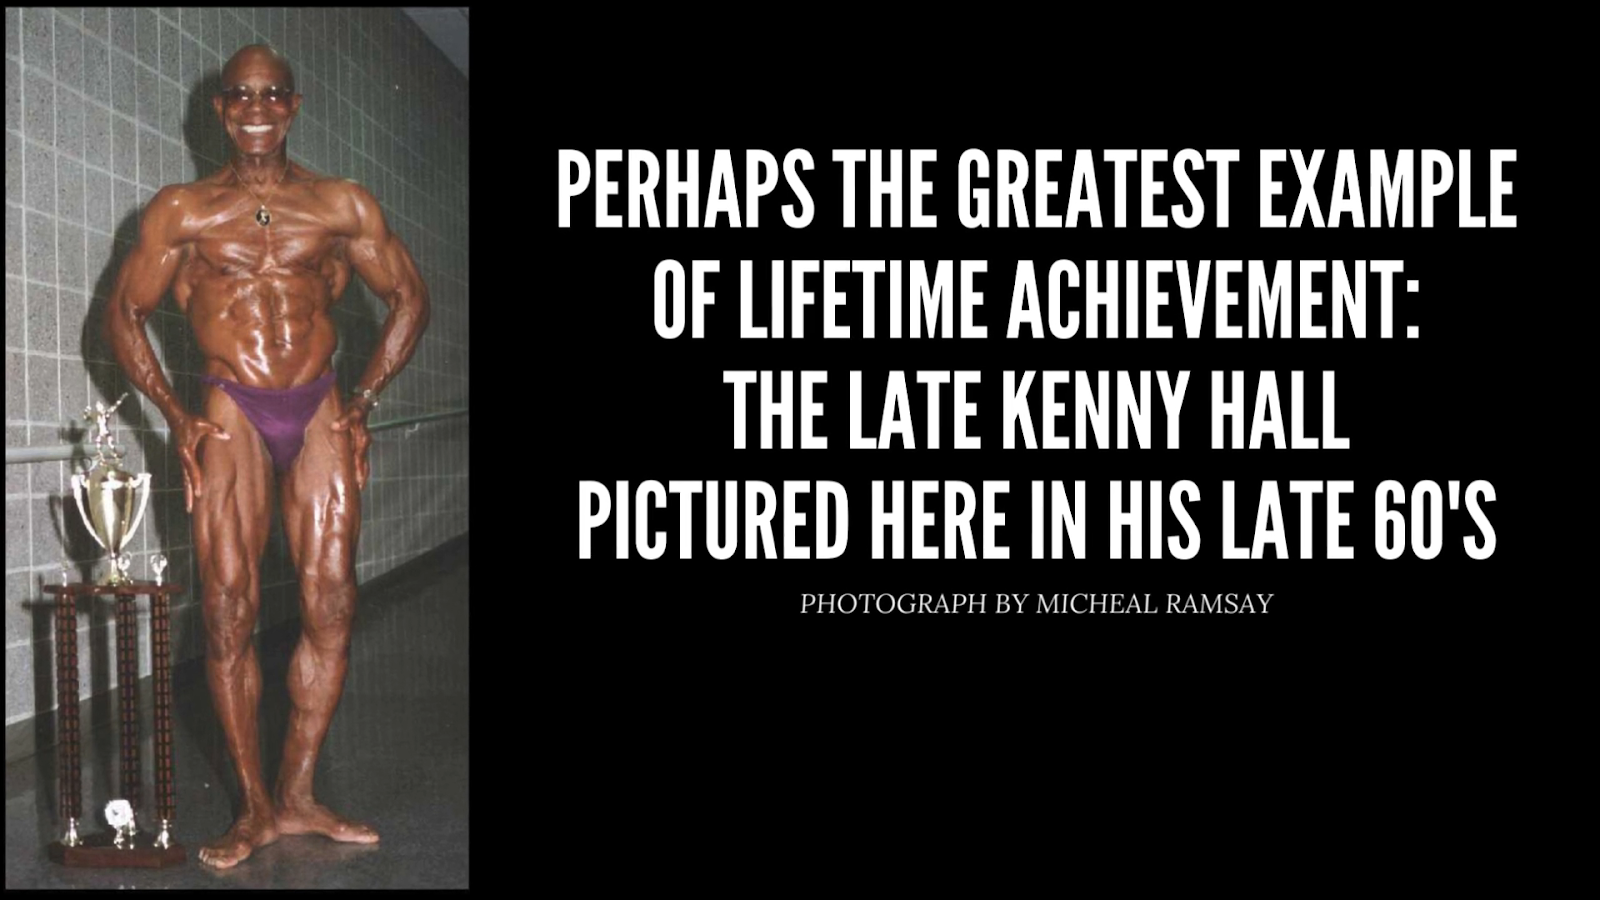 Natural Bodybuilder Kenny Hall competing in his 60s